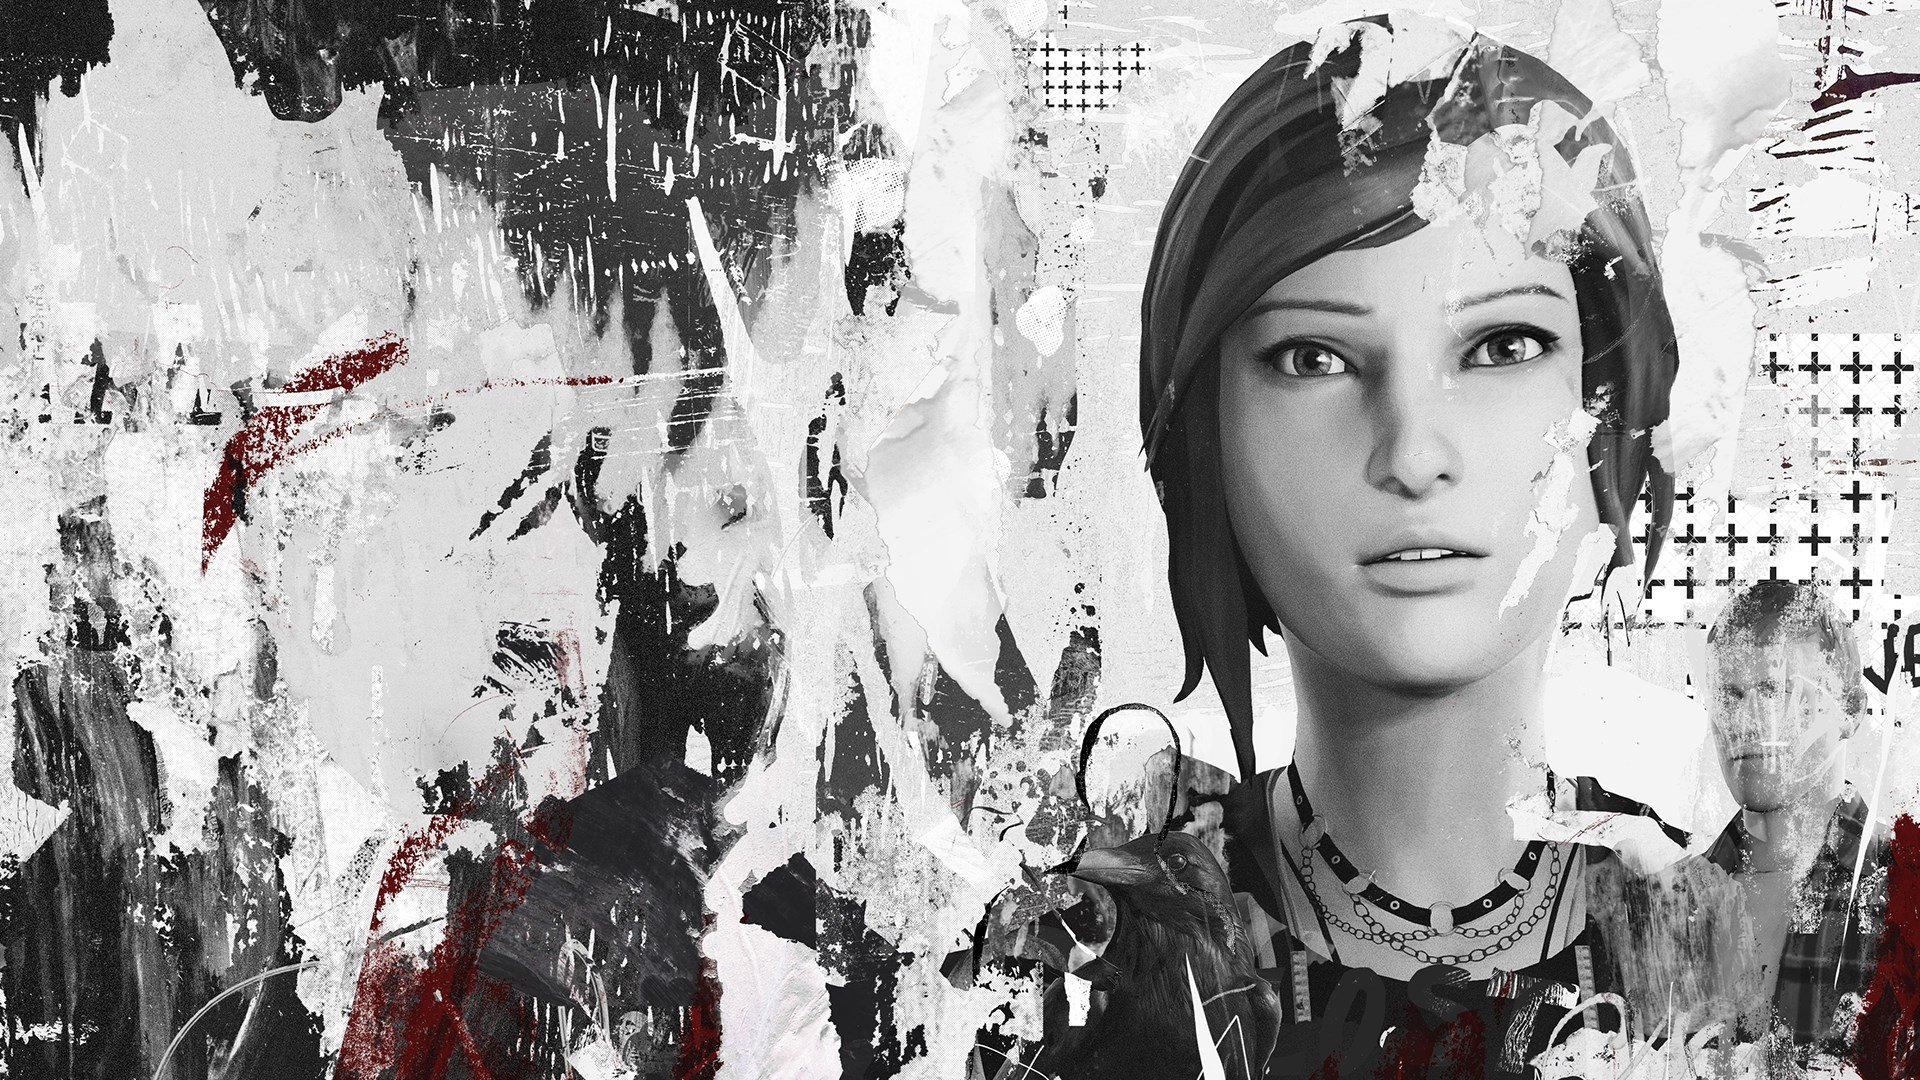 Life is Strange: Before the Storm Episode 1 cover image